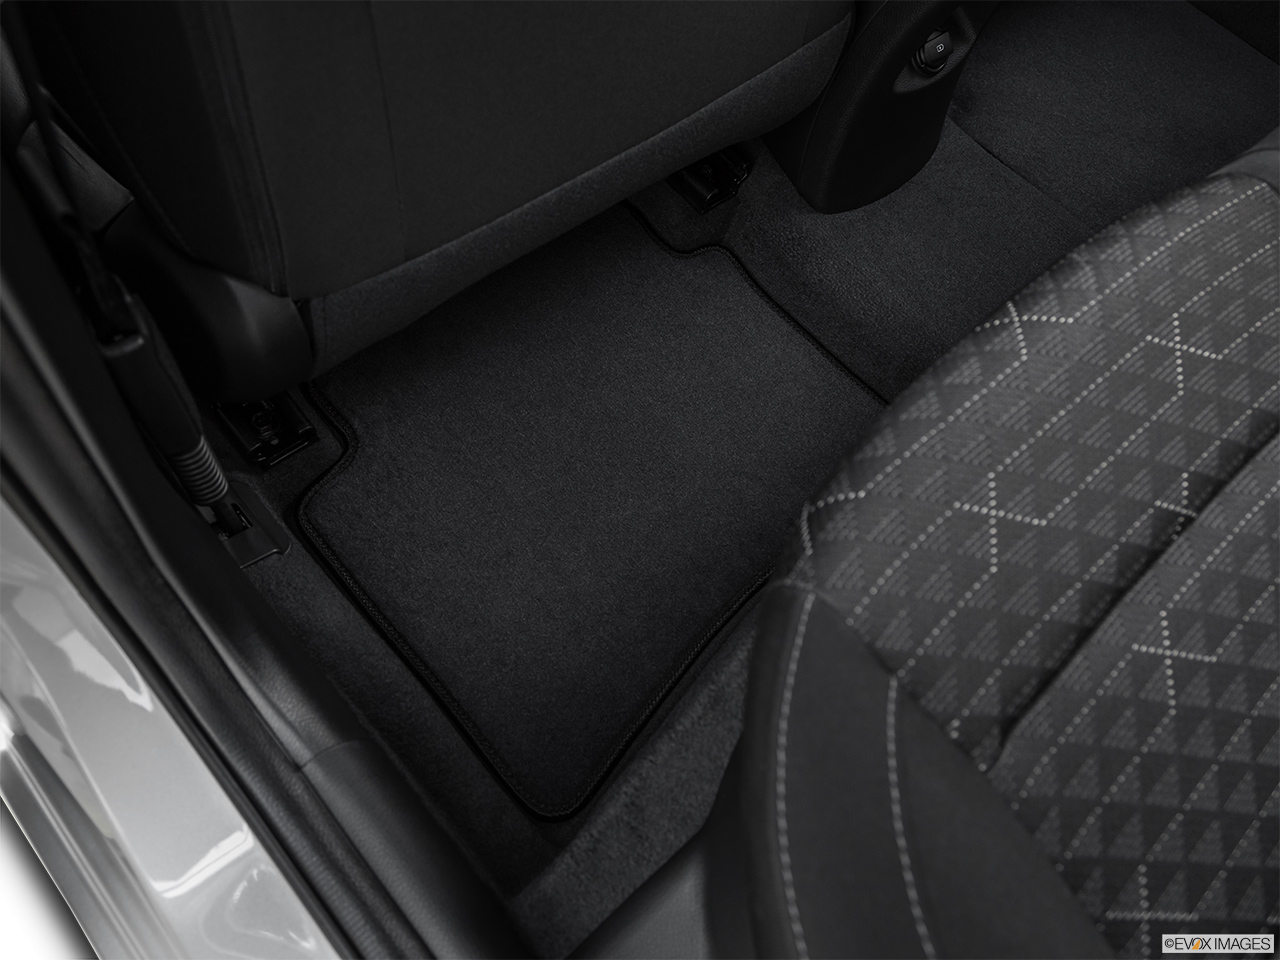 2019 Kia Rio 5-door S Rear driver's side floor mat. Mid-seat level from outside looking in. 